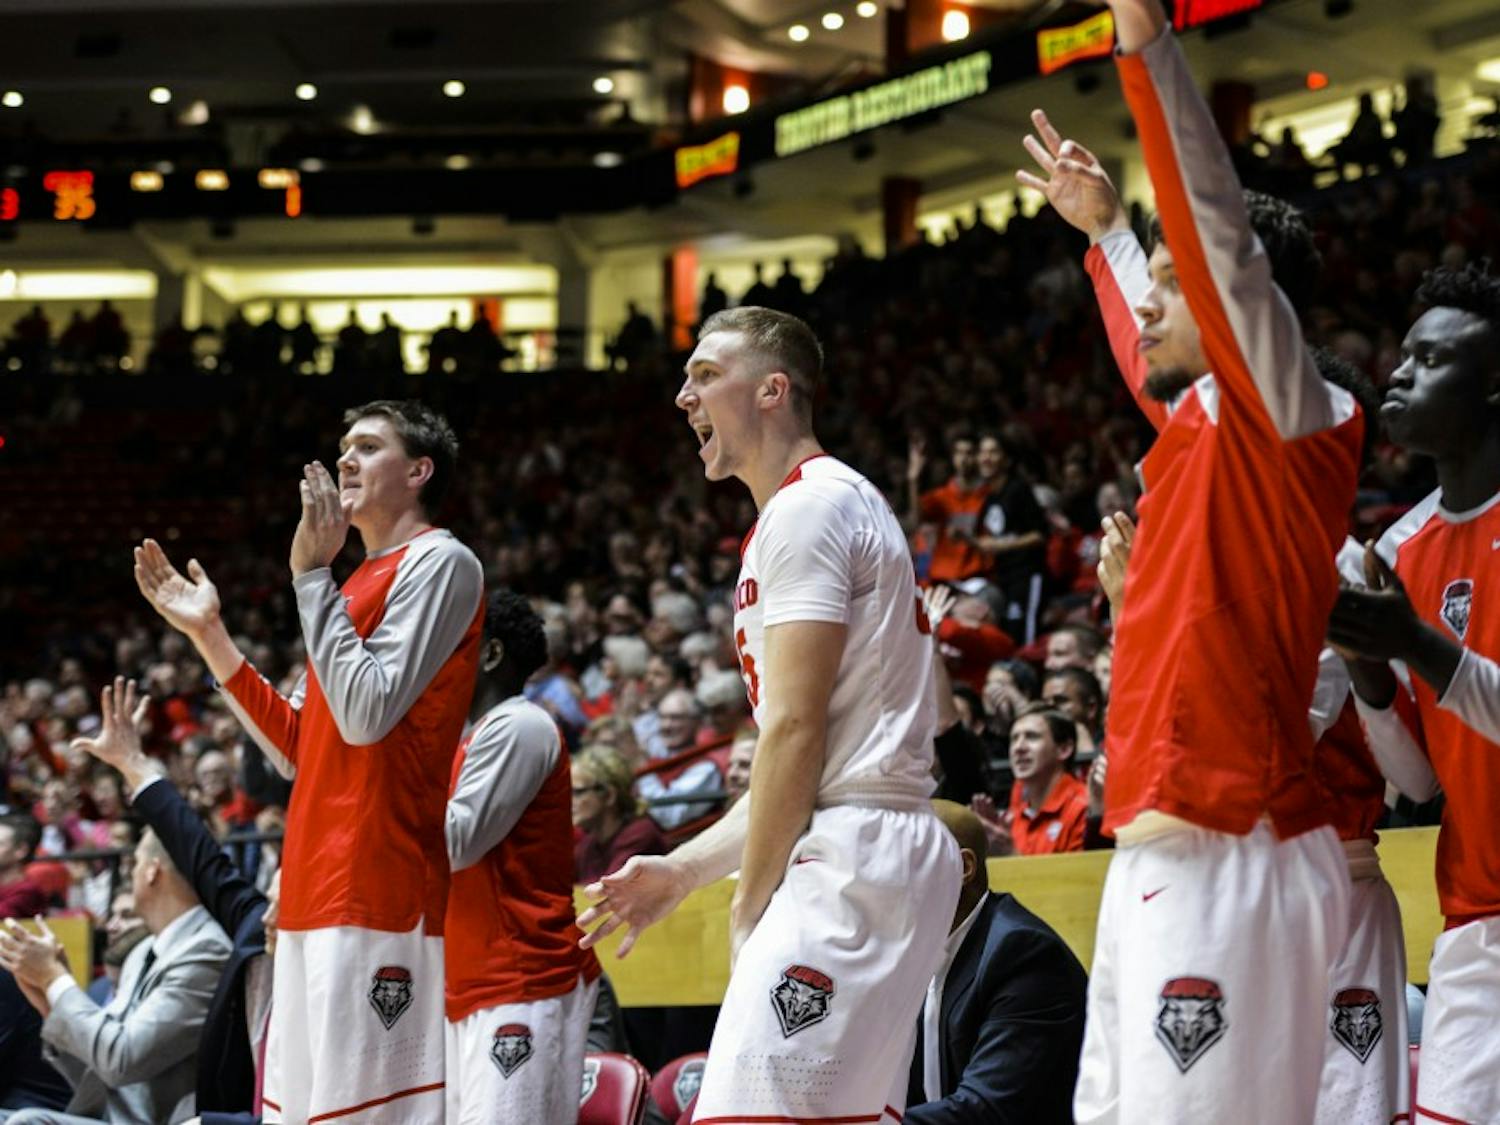 Redshirt sophomore forward Connor MacDougall, center, celebrates with his teammates Tuesday, Jan. 24, 2017 at WisePies Arena. The Lobos defeated Utah State 74-61, making their conference record 6-3.&nbsp;